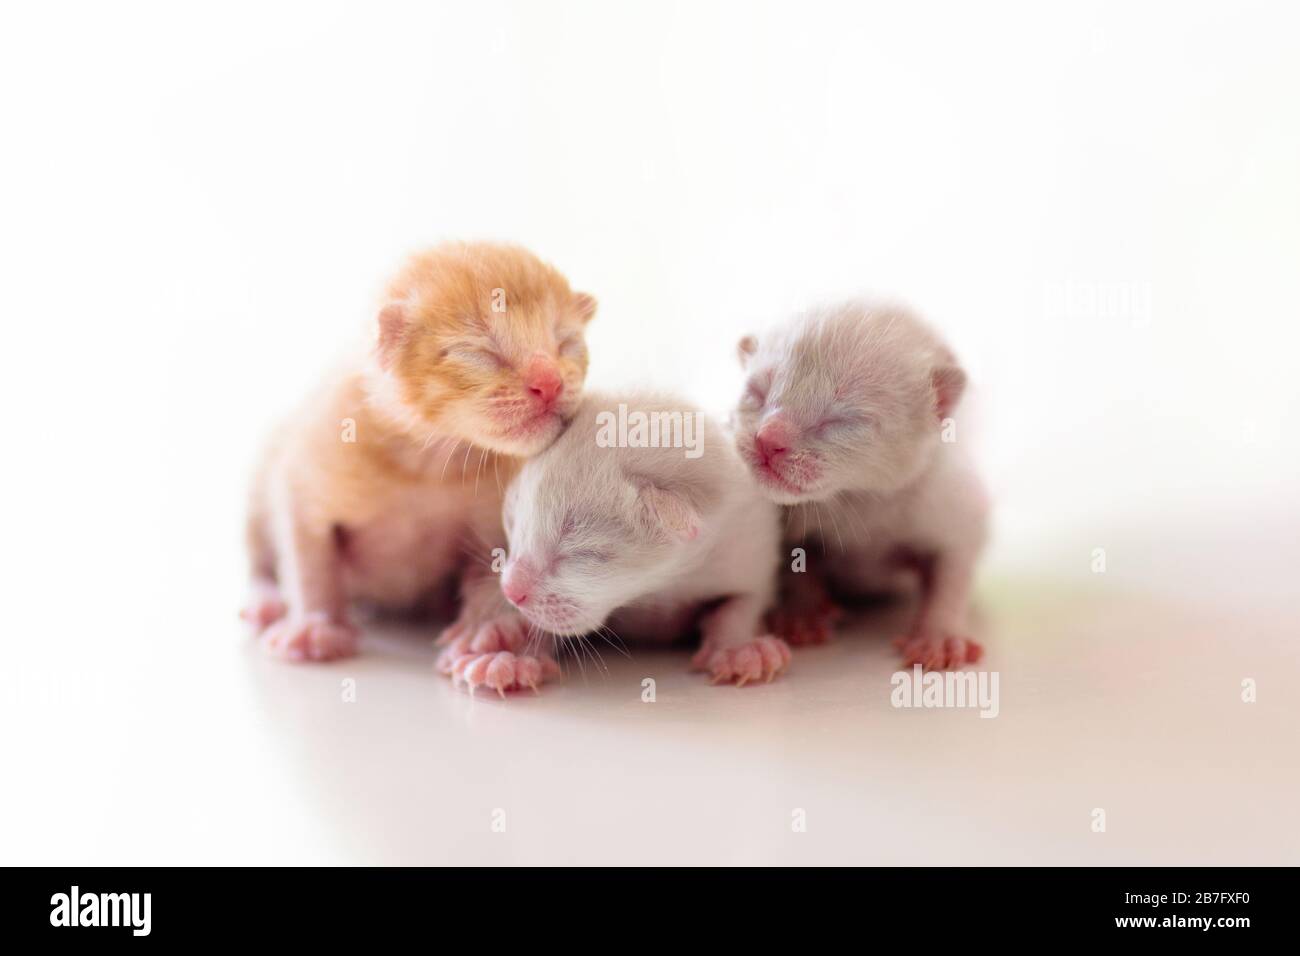 Baby cat. Newborn kitten playing. Domestic animal. Home pet. Young cats. Cute funny cats play at home. Stock Photo